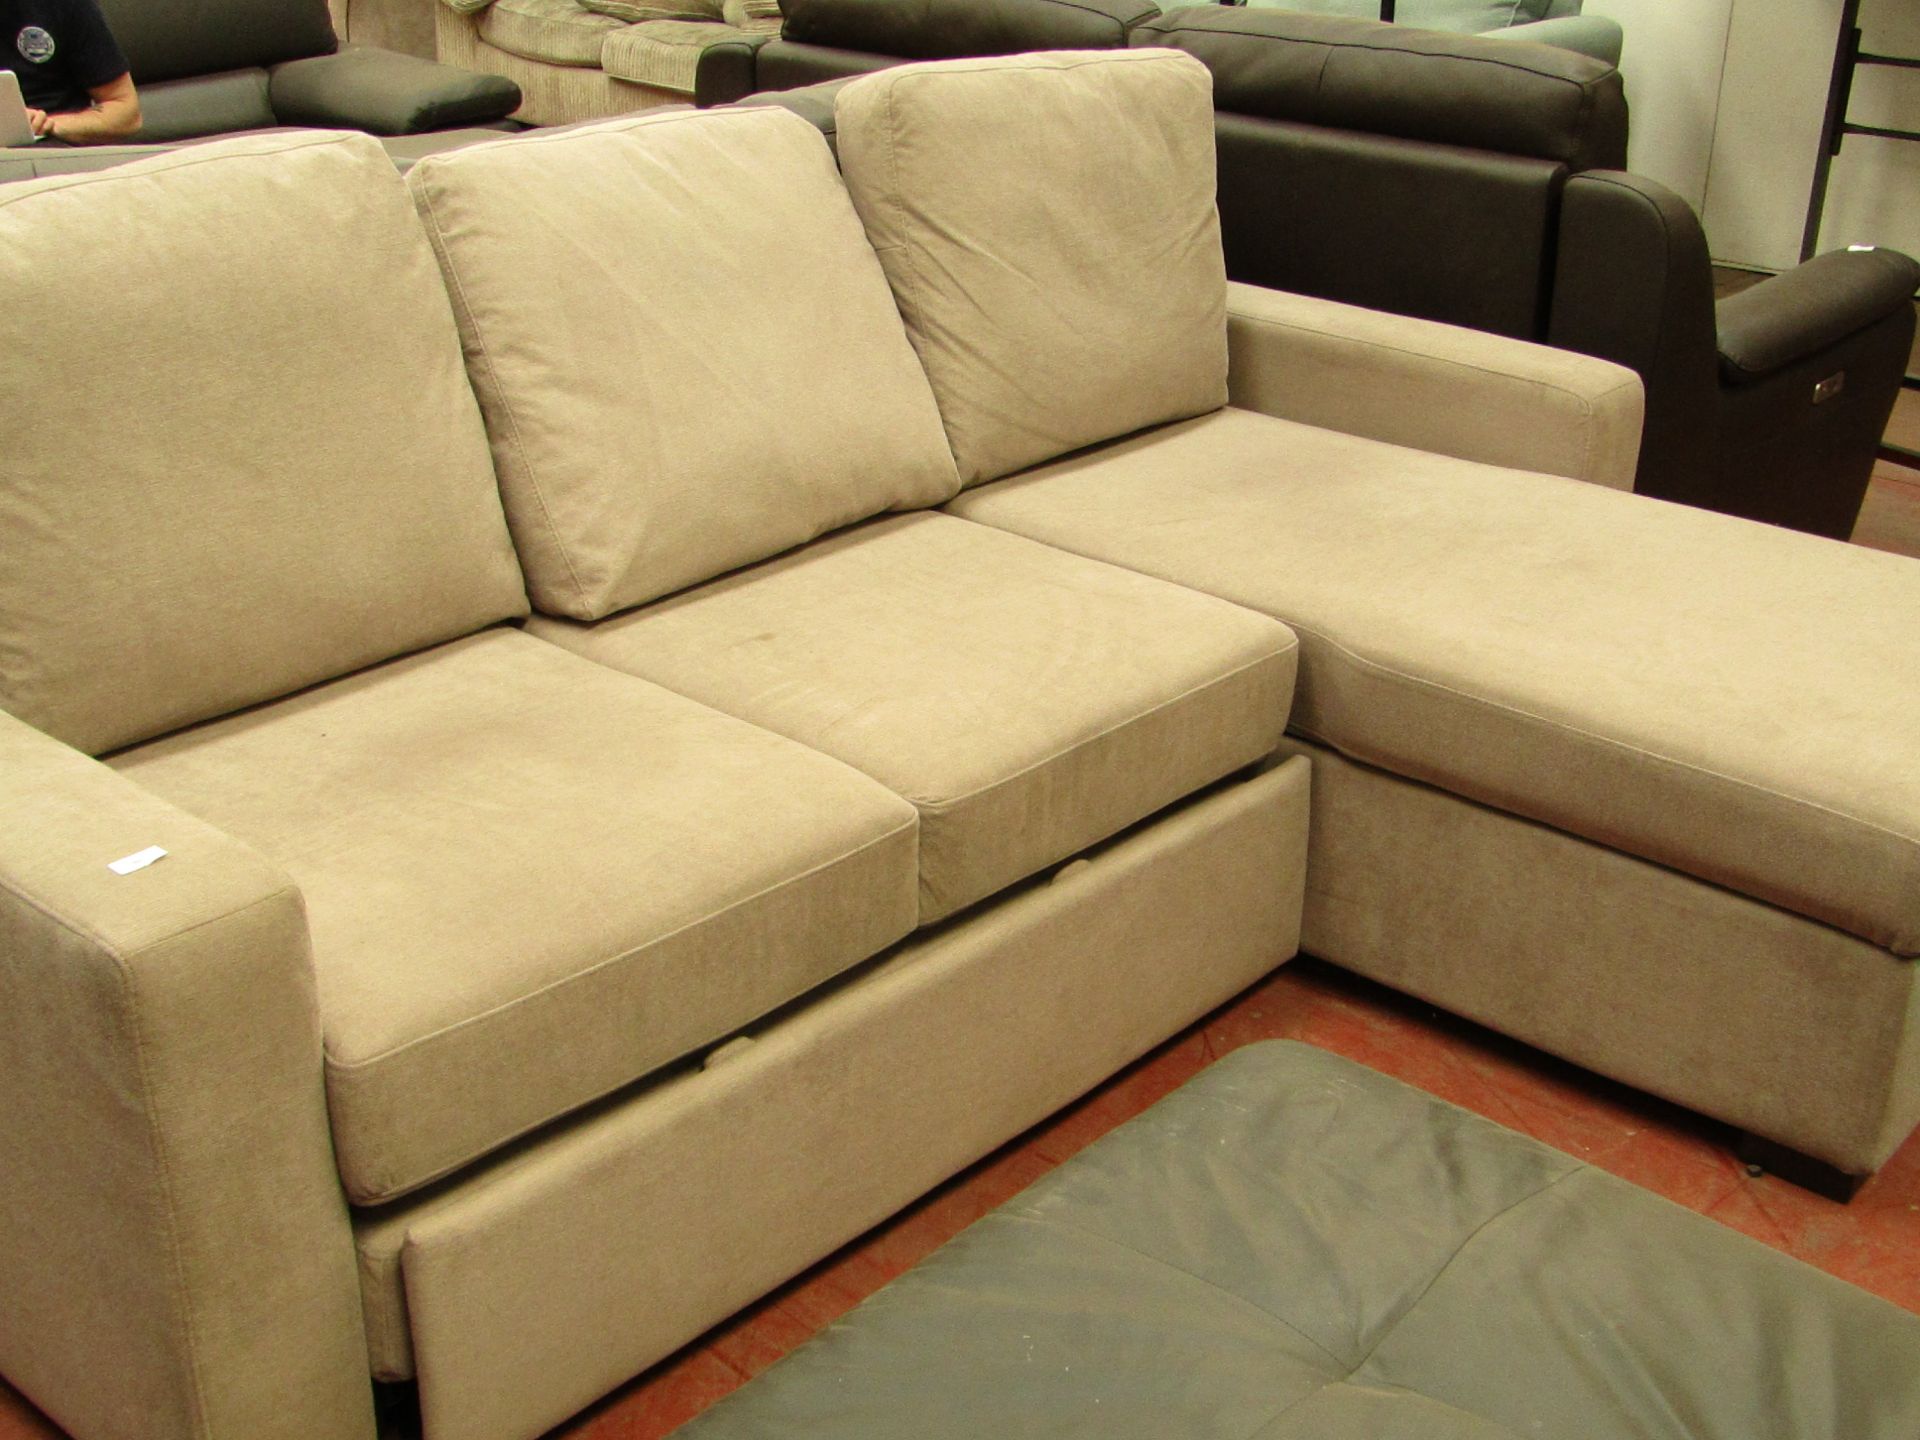 Polaski 3 Seater Pull out Sofa Bed Chaise with Built in Ottoman under chaise, mechanism is fully - Image 2 of 2